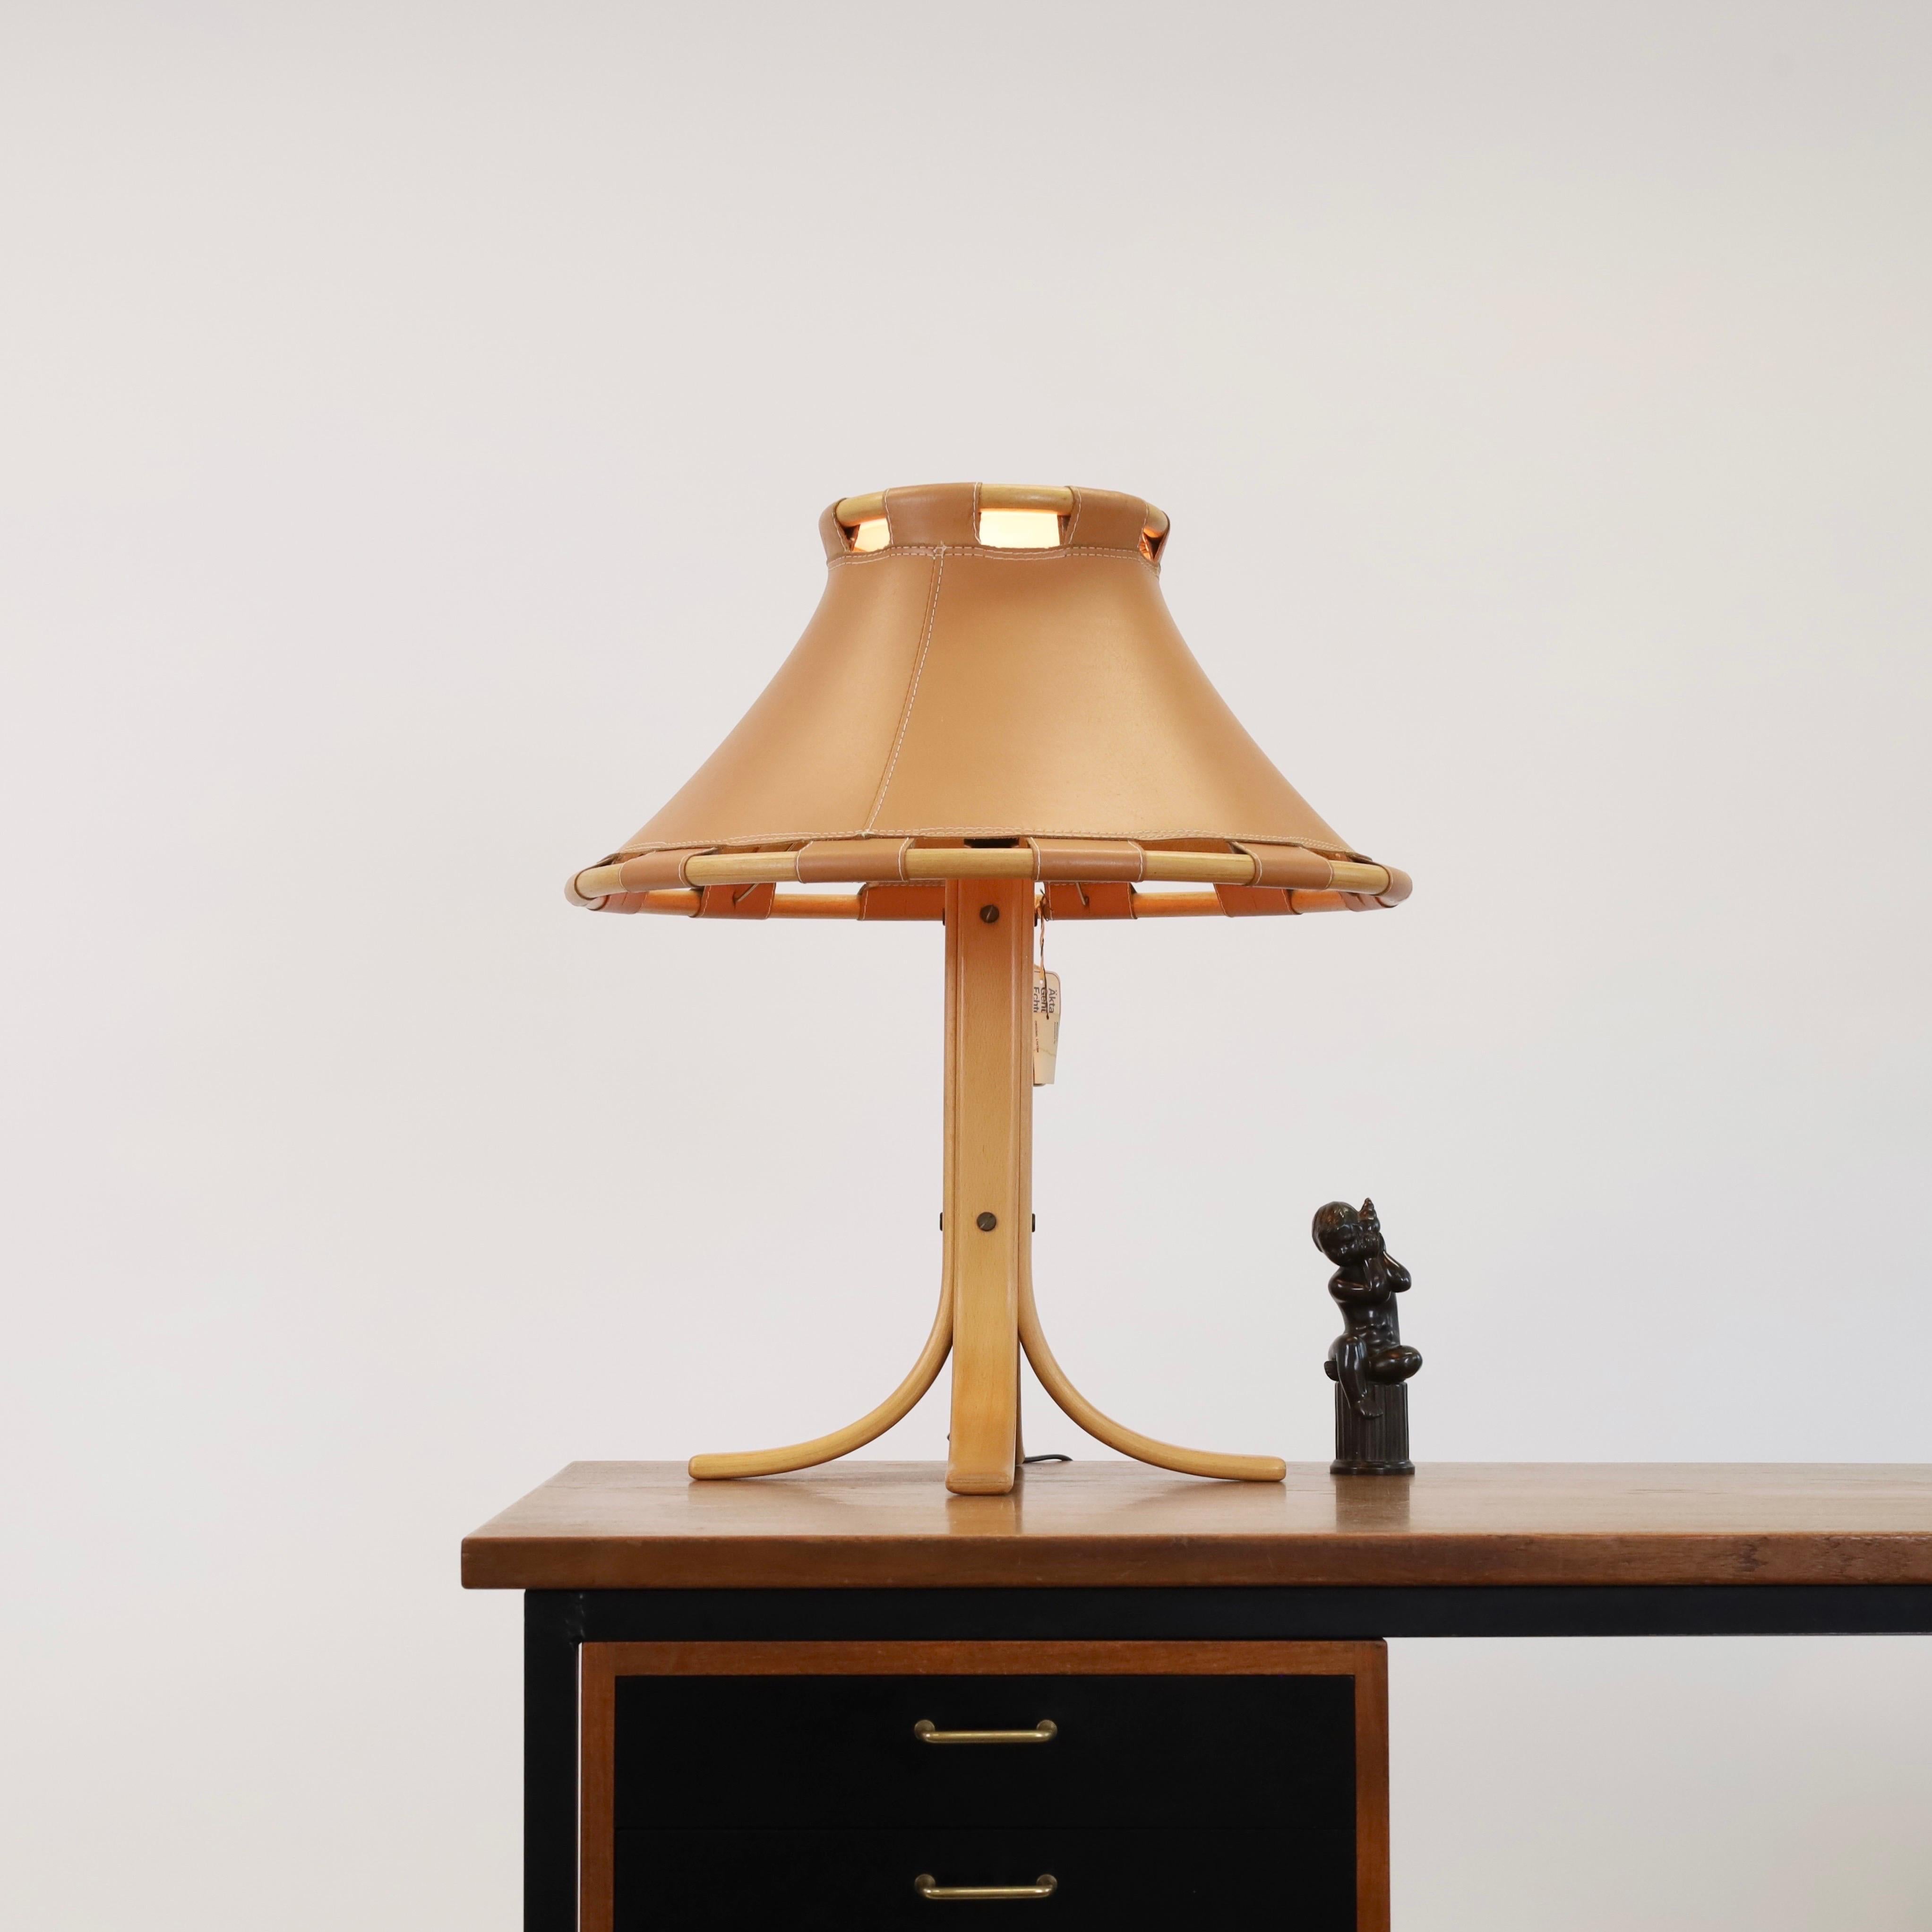 Danish Beech wood and leather Desk Lamp by Anna Ehrner for Atelje Lyktan, 1970s, Sweden For Sale